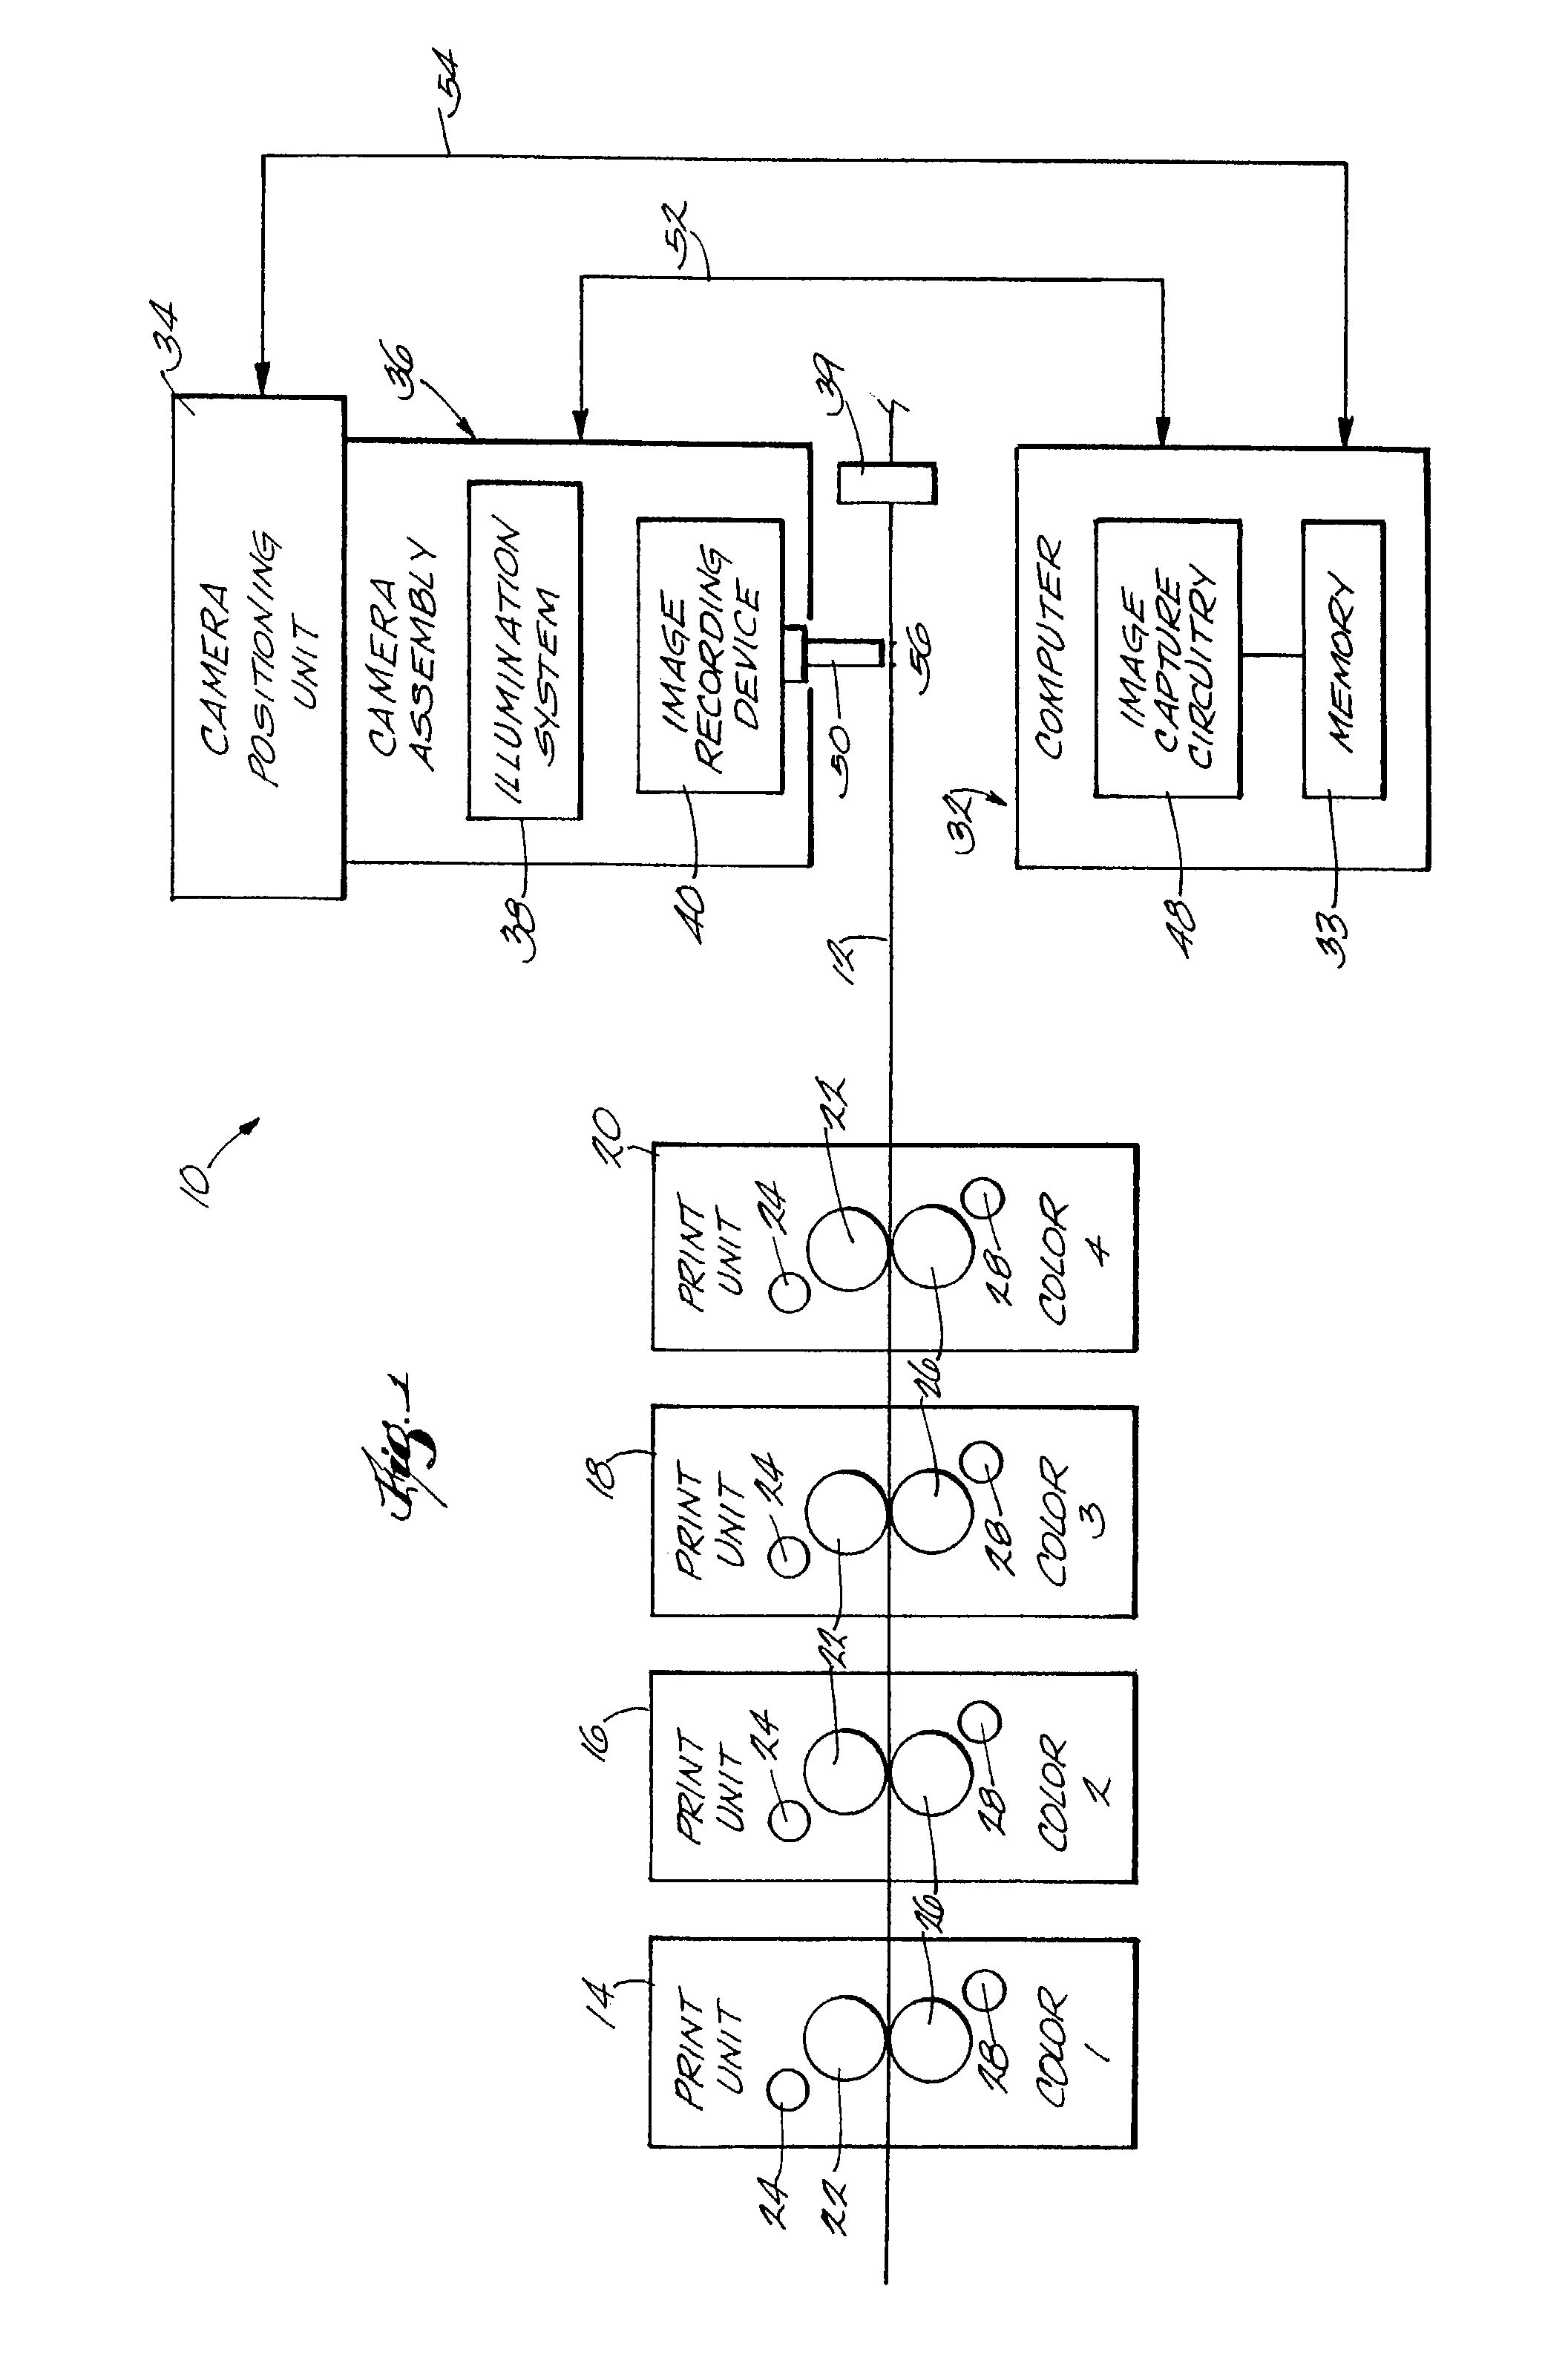 System and method for measuring color on a printing press